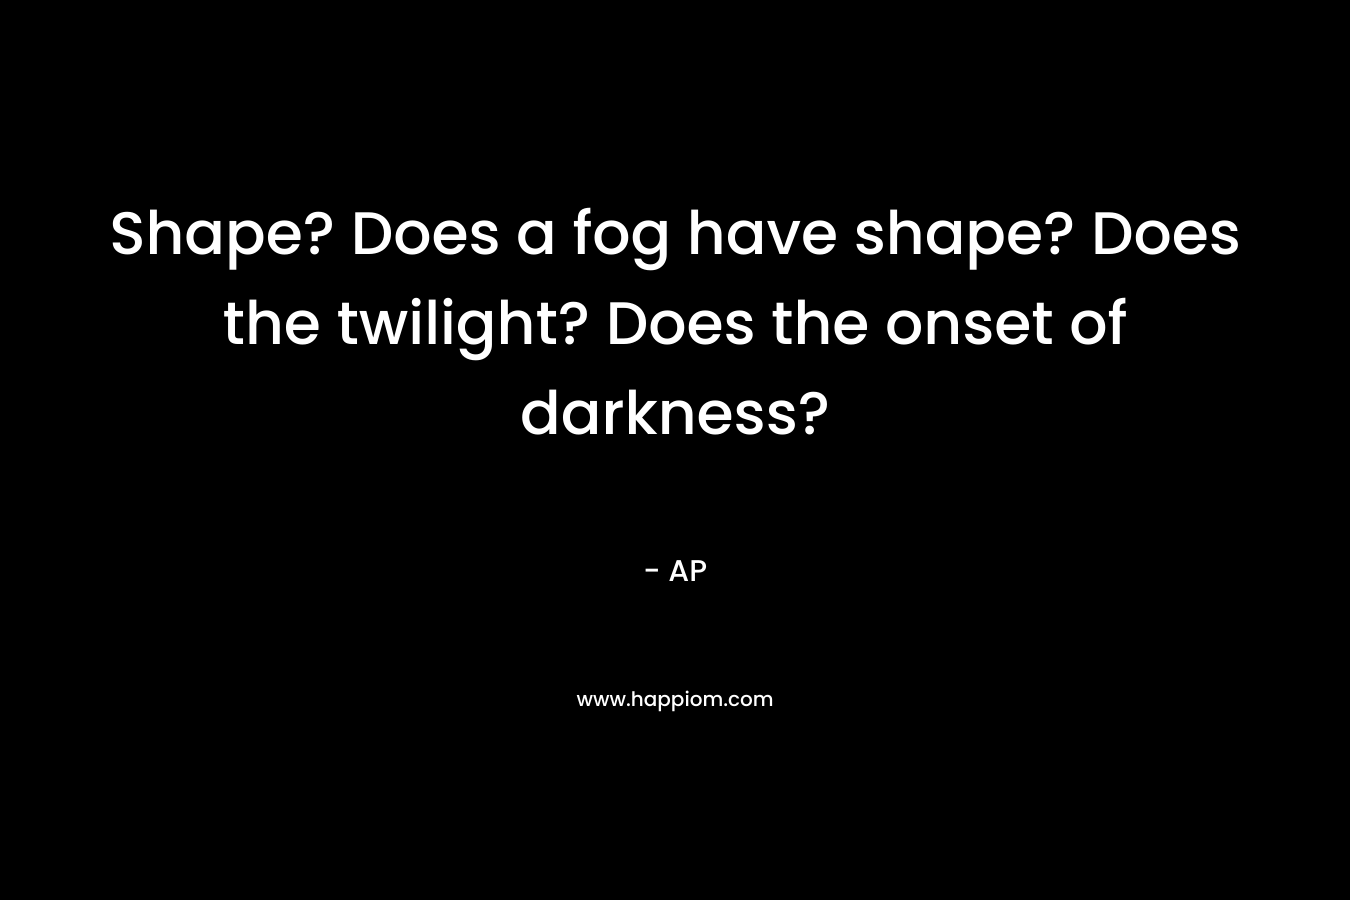 Shape? Does a fog have shape? Does the twilight? Does the onset of darkness? – AP